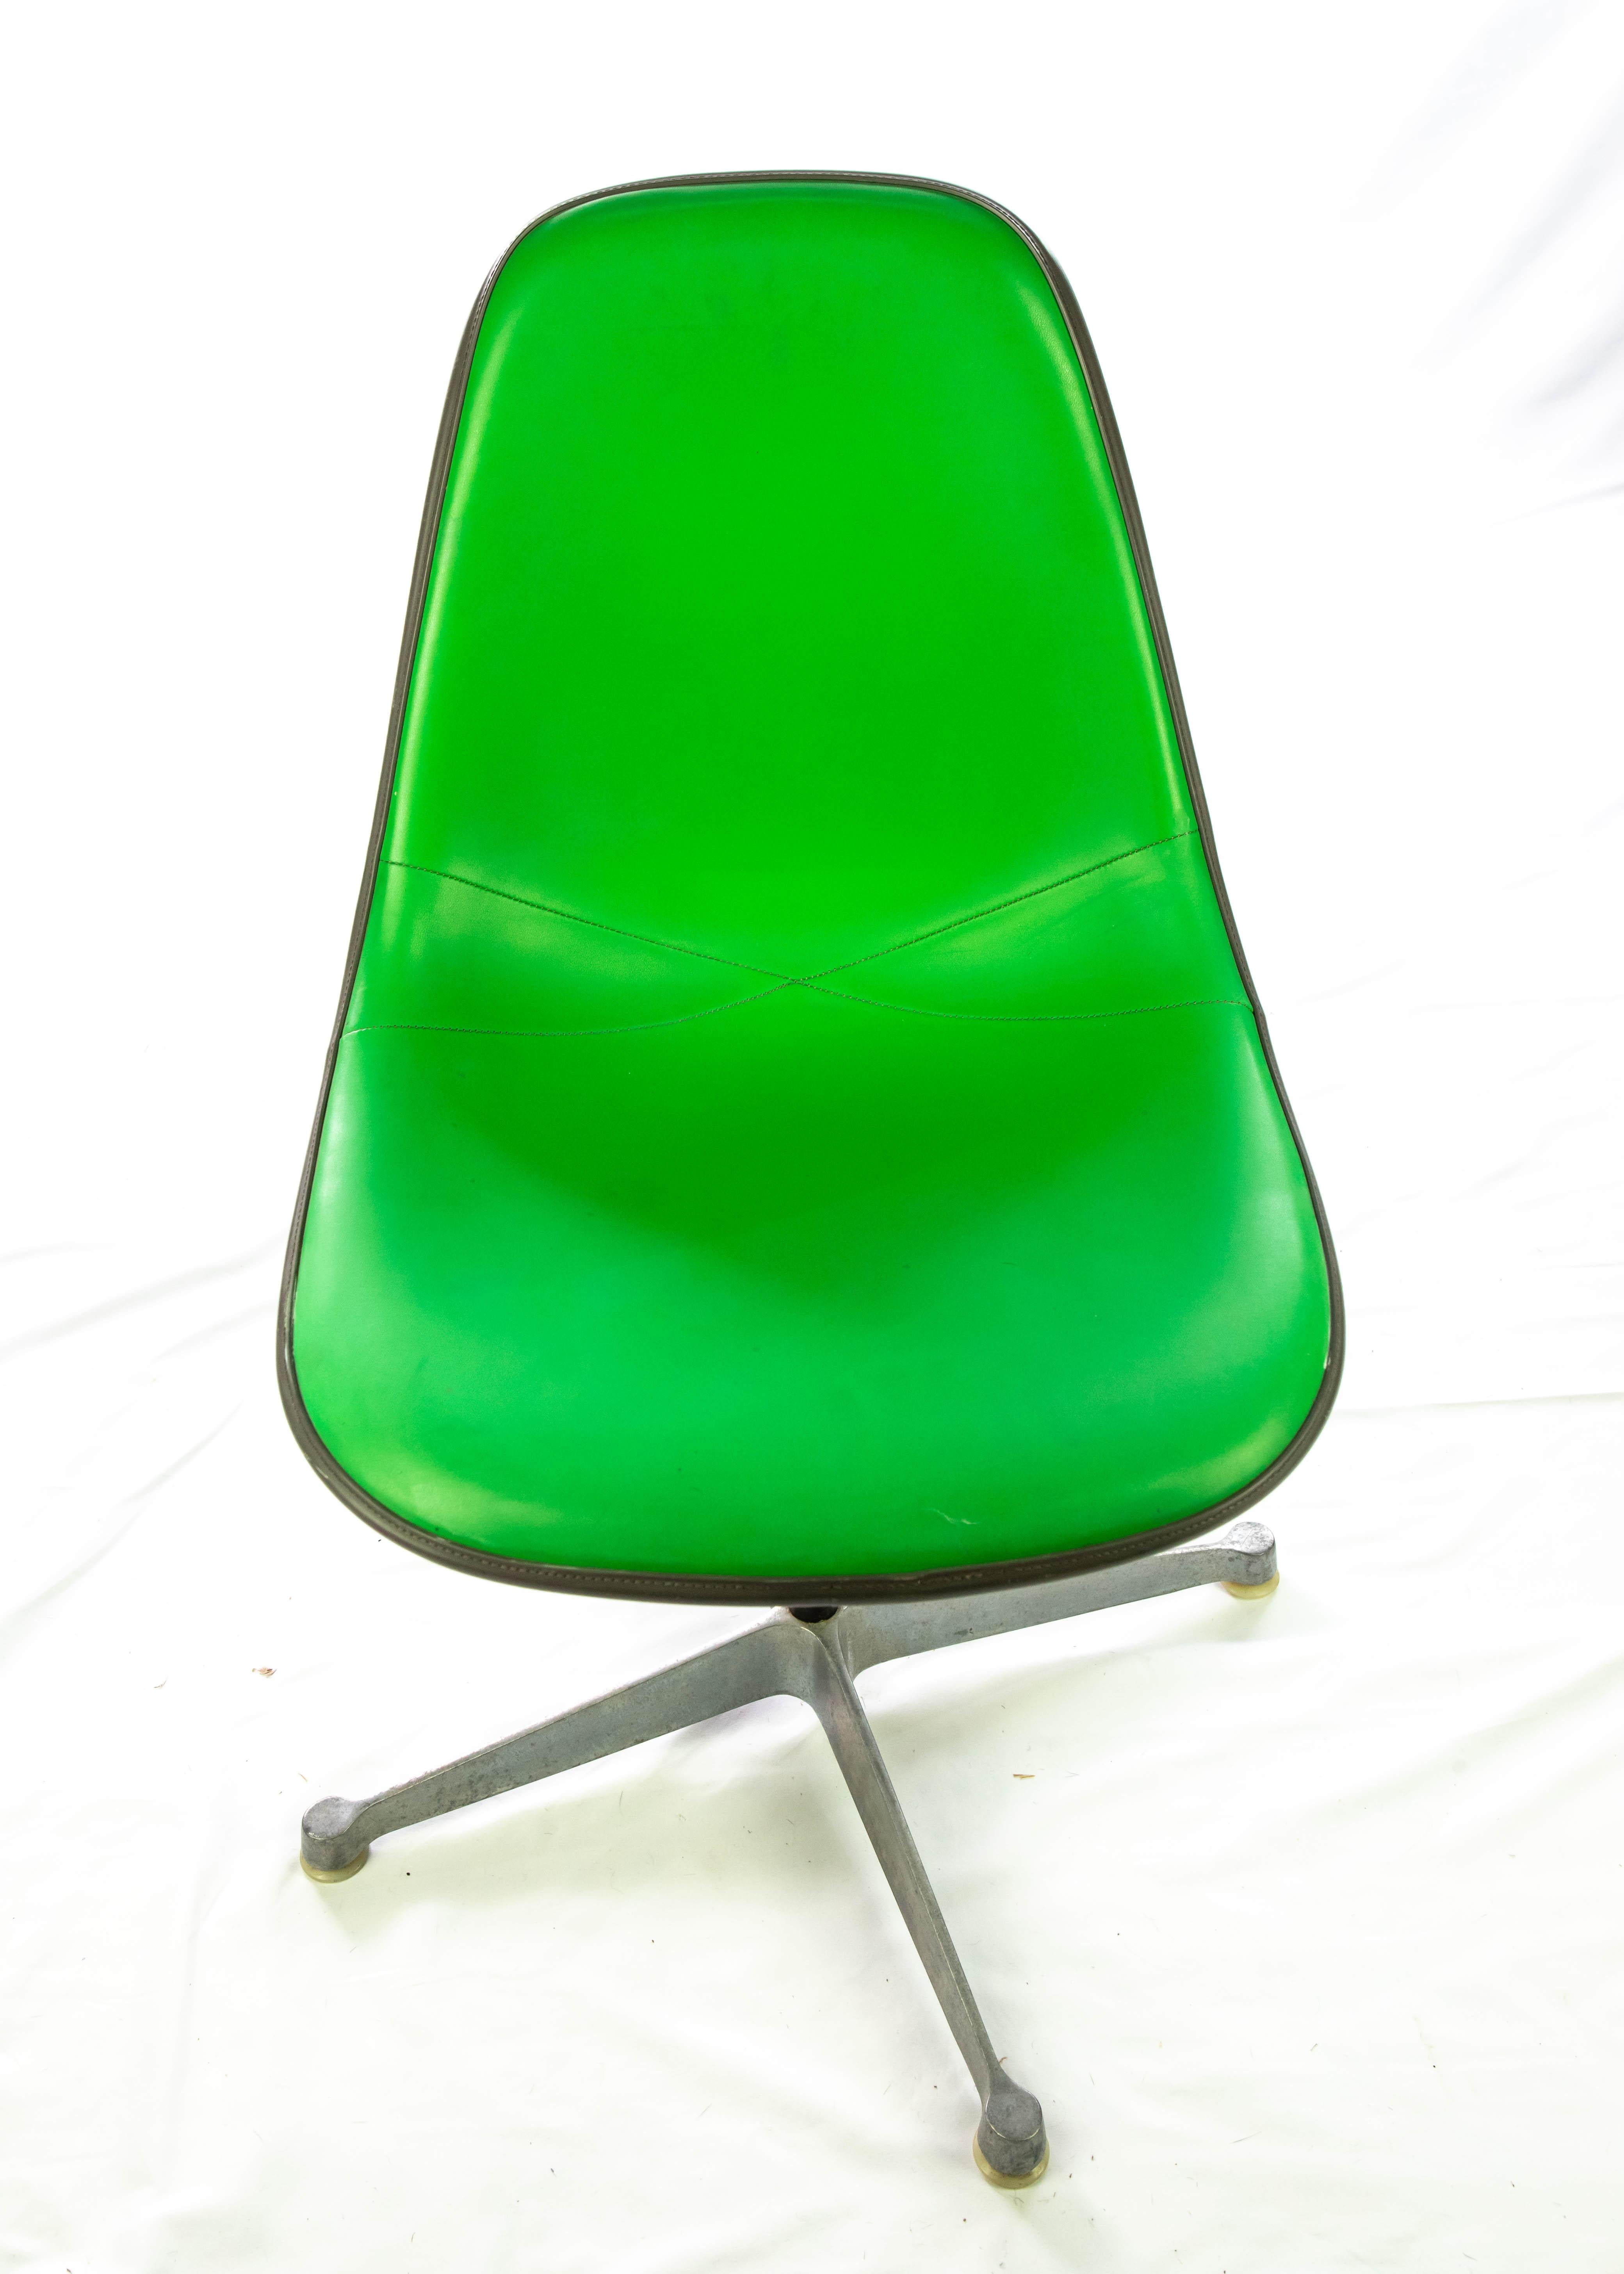 Offering these stunning Eames fiberglass upholstered swivel chairs. This bright green will not disappoint and they will be the talk of any room they are in! The condition of these are great, very slight scuff marks to the grey cording around the